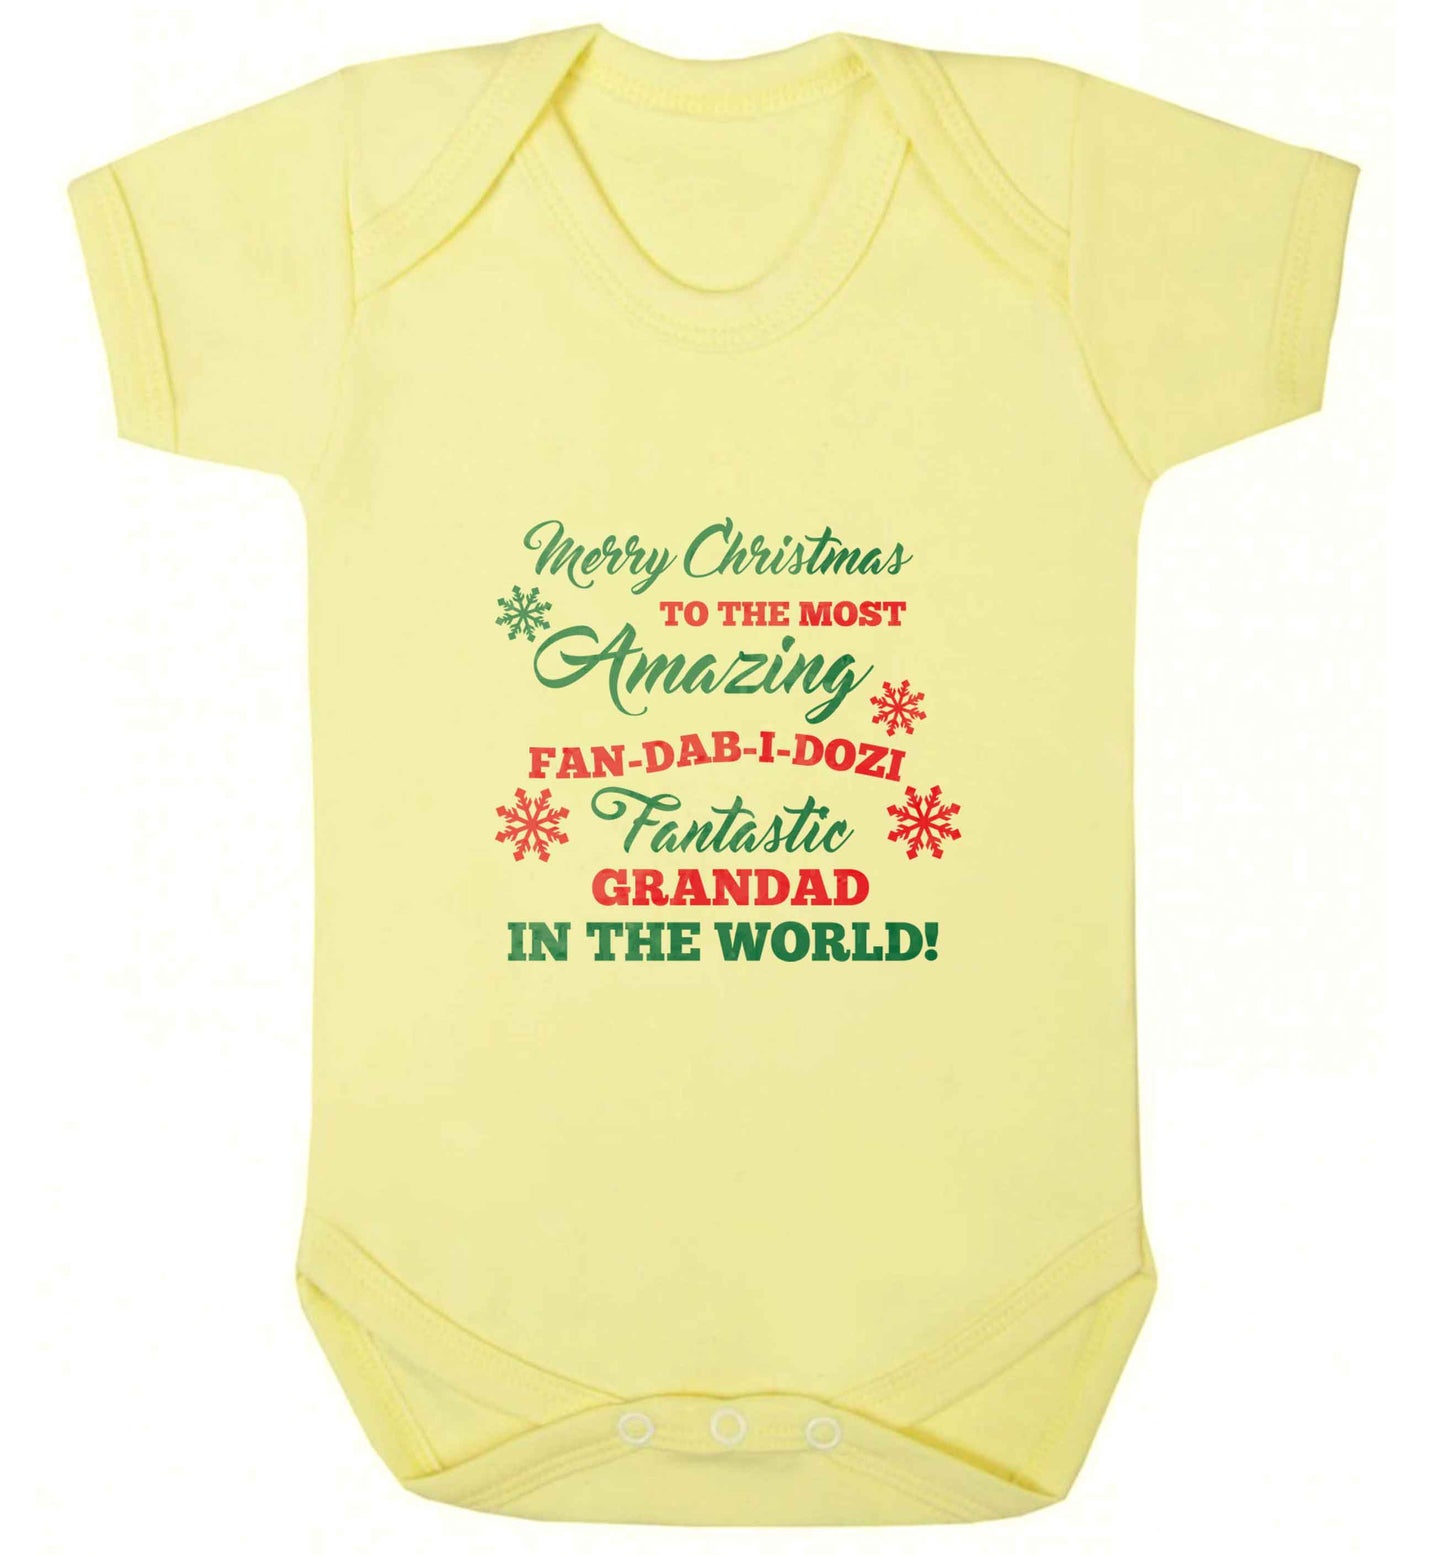 Merry Christmas to the most amazing fan-dab-i-dozi fantasic Grandad in the world baby vest pale yellow 18-24 months